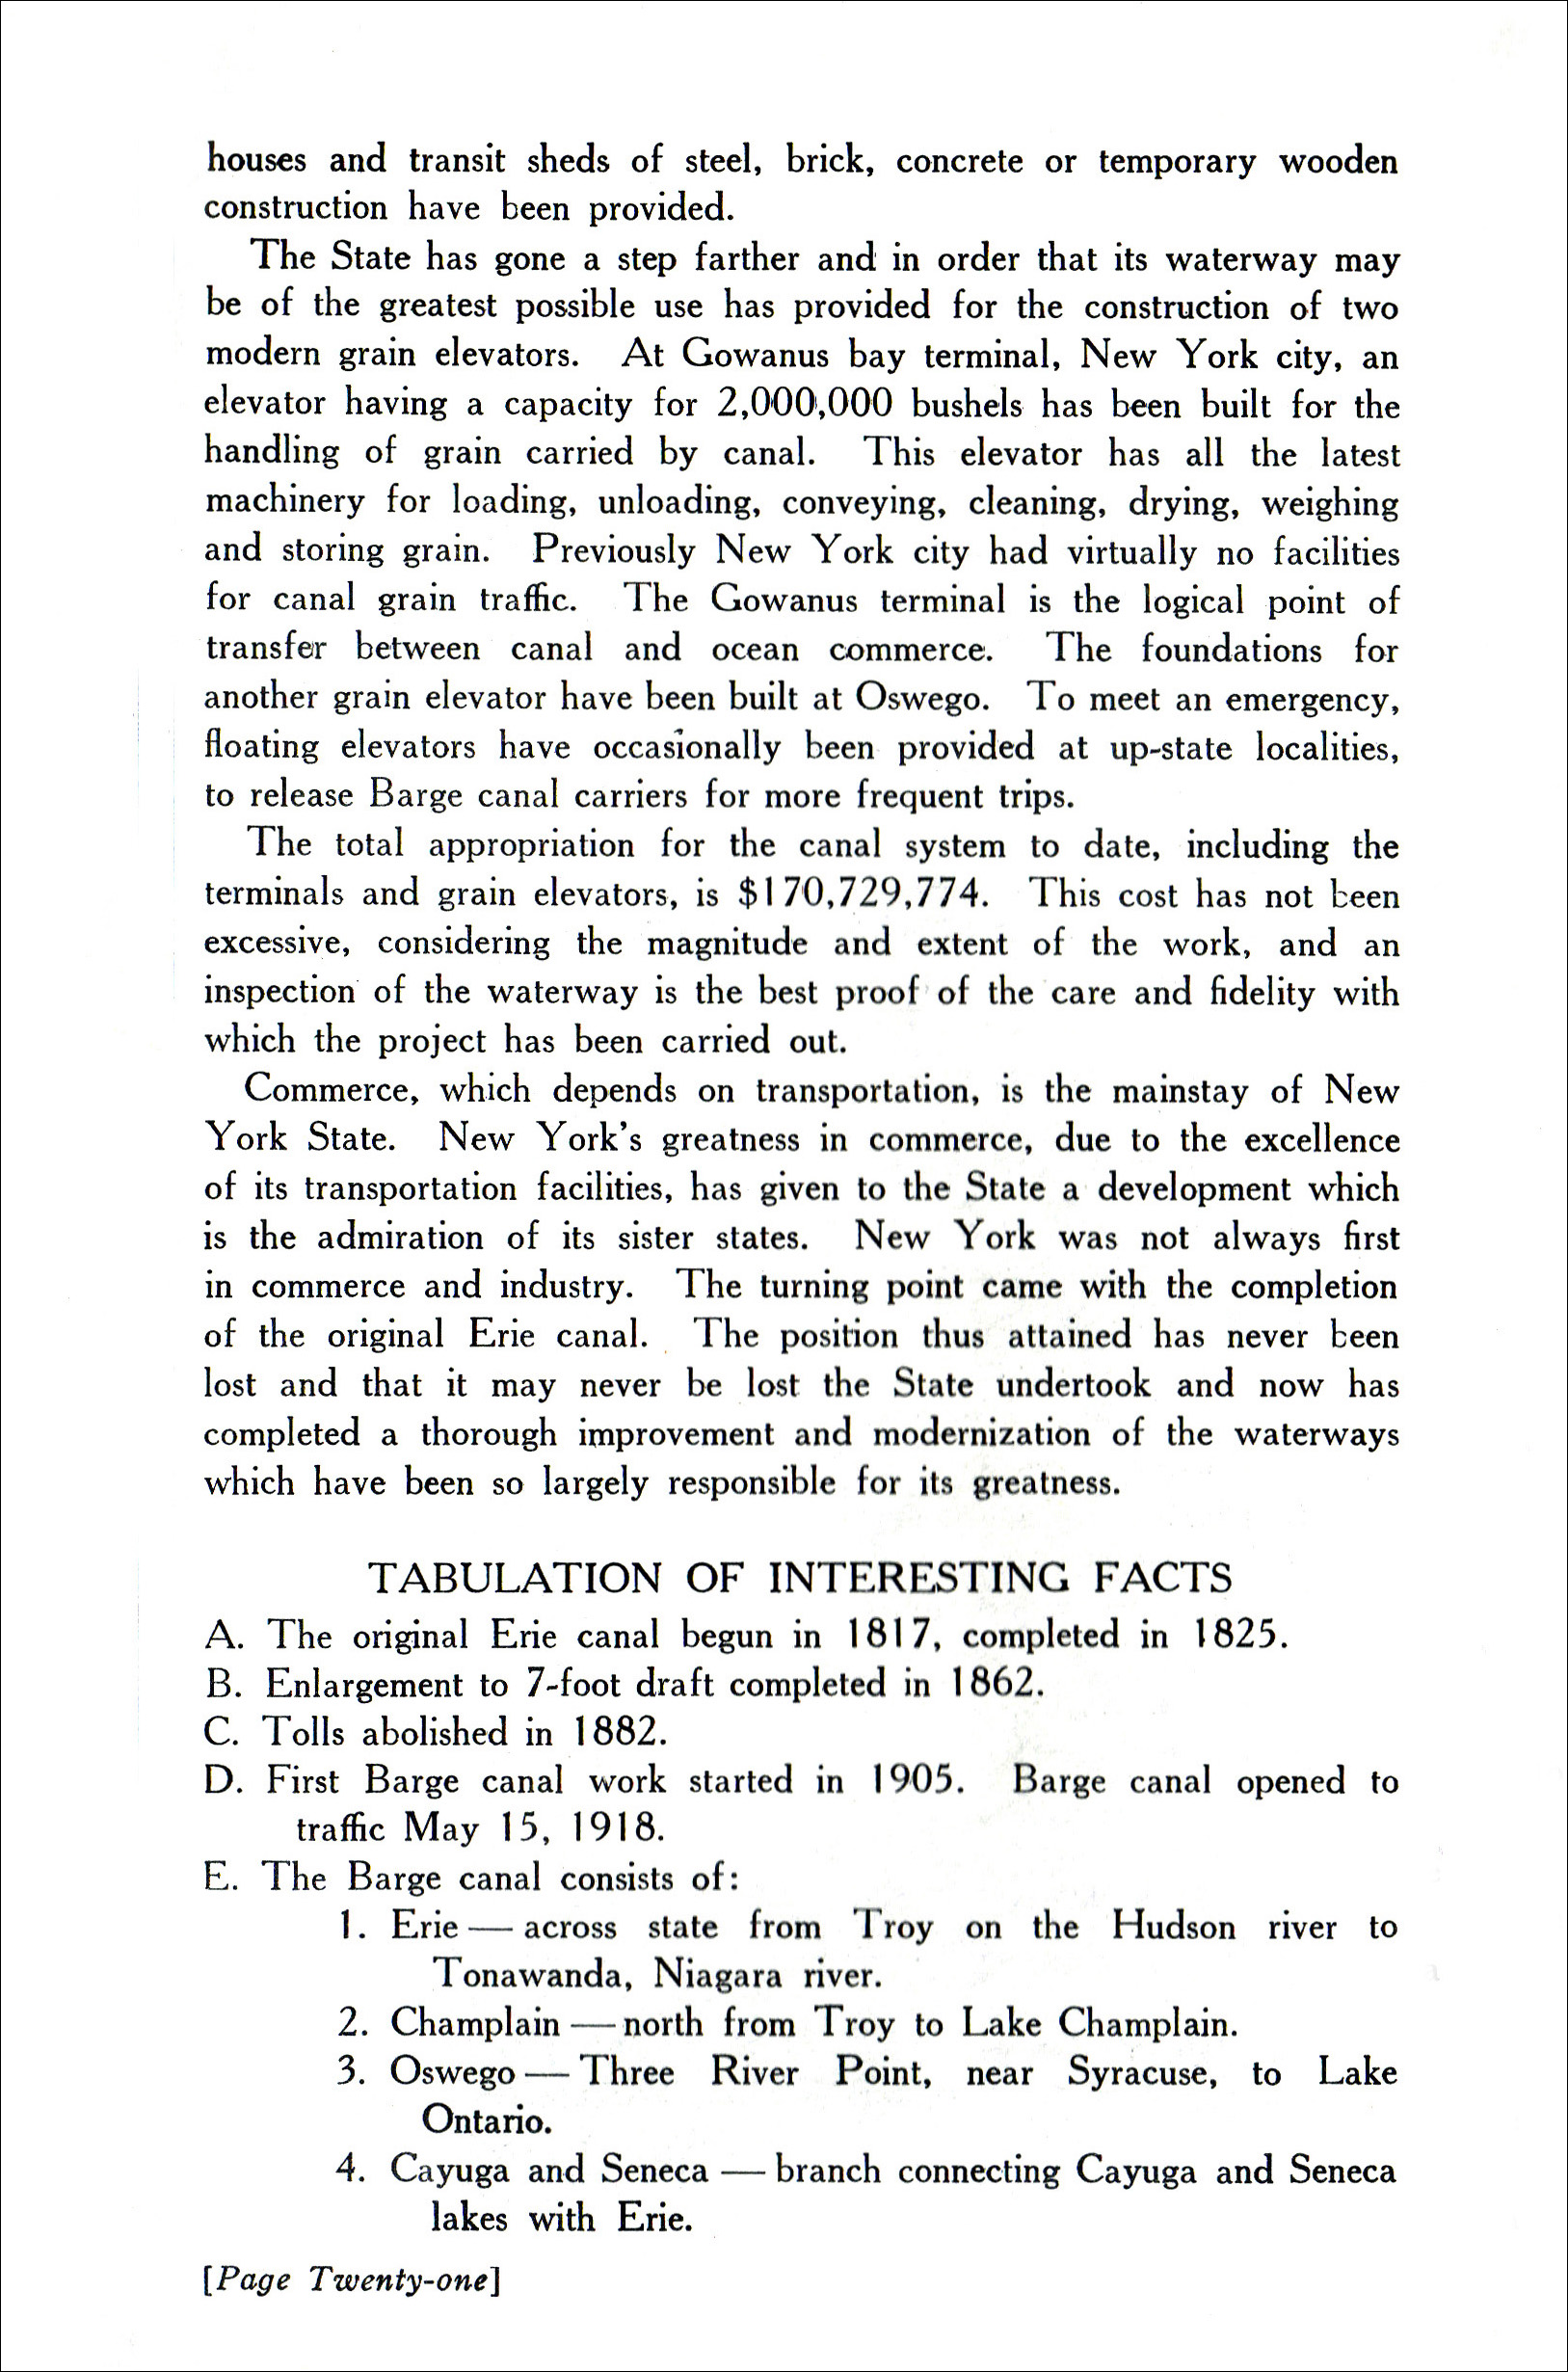 Page 21 of Finch pamphlet